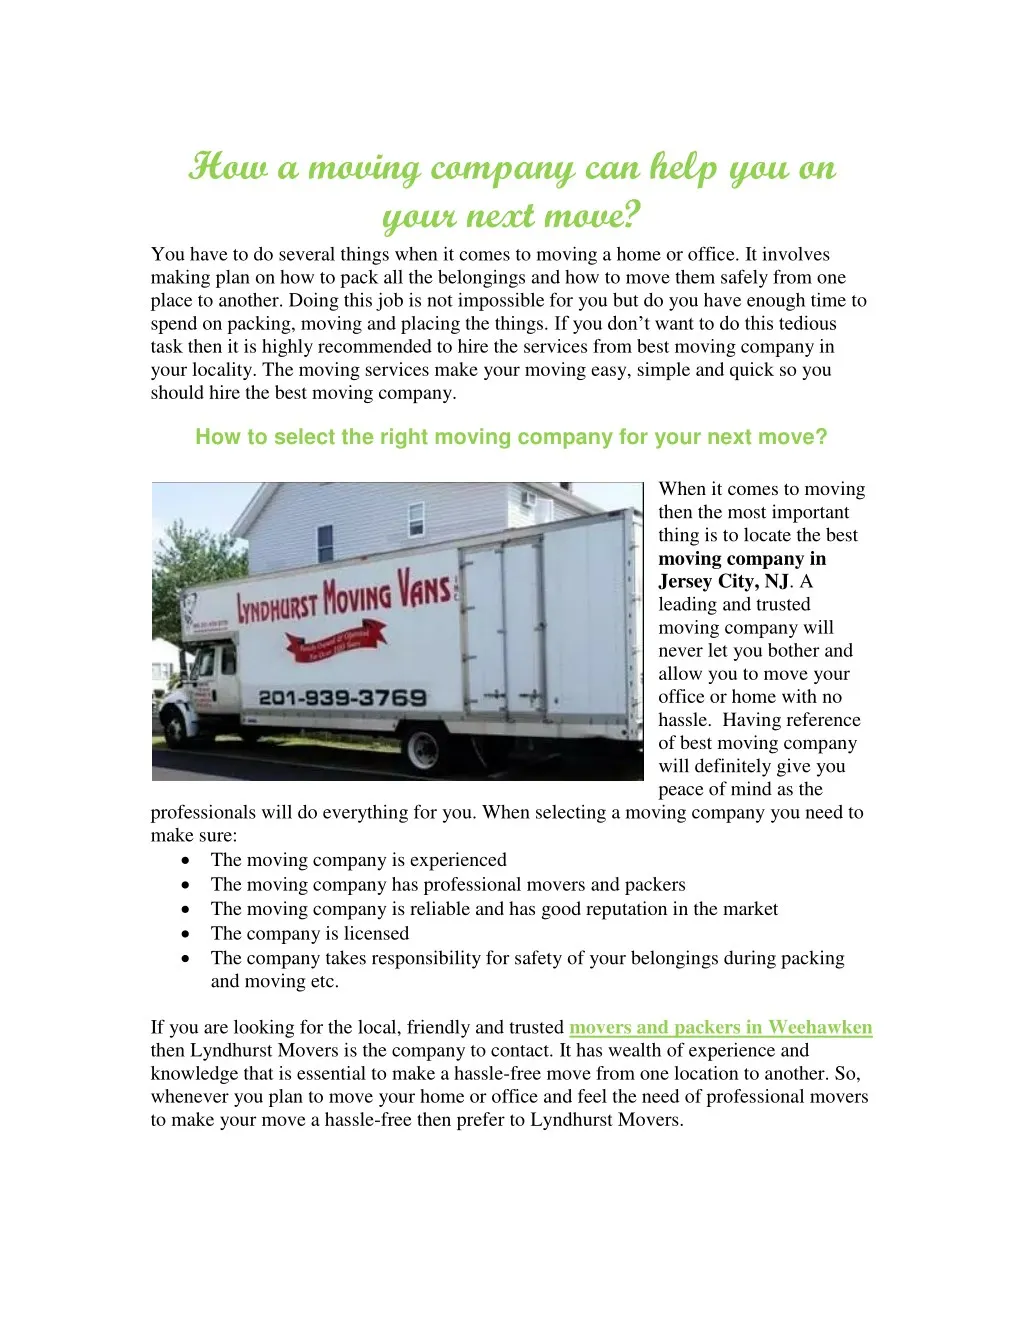 how a moving company can help you on your next